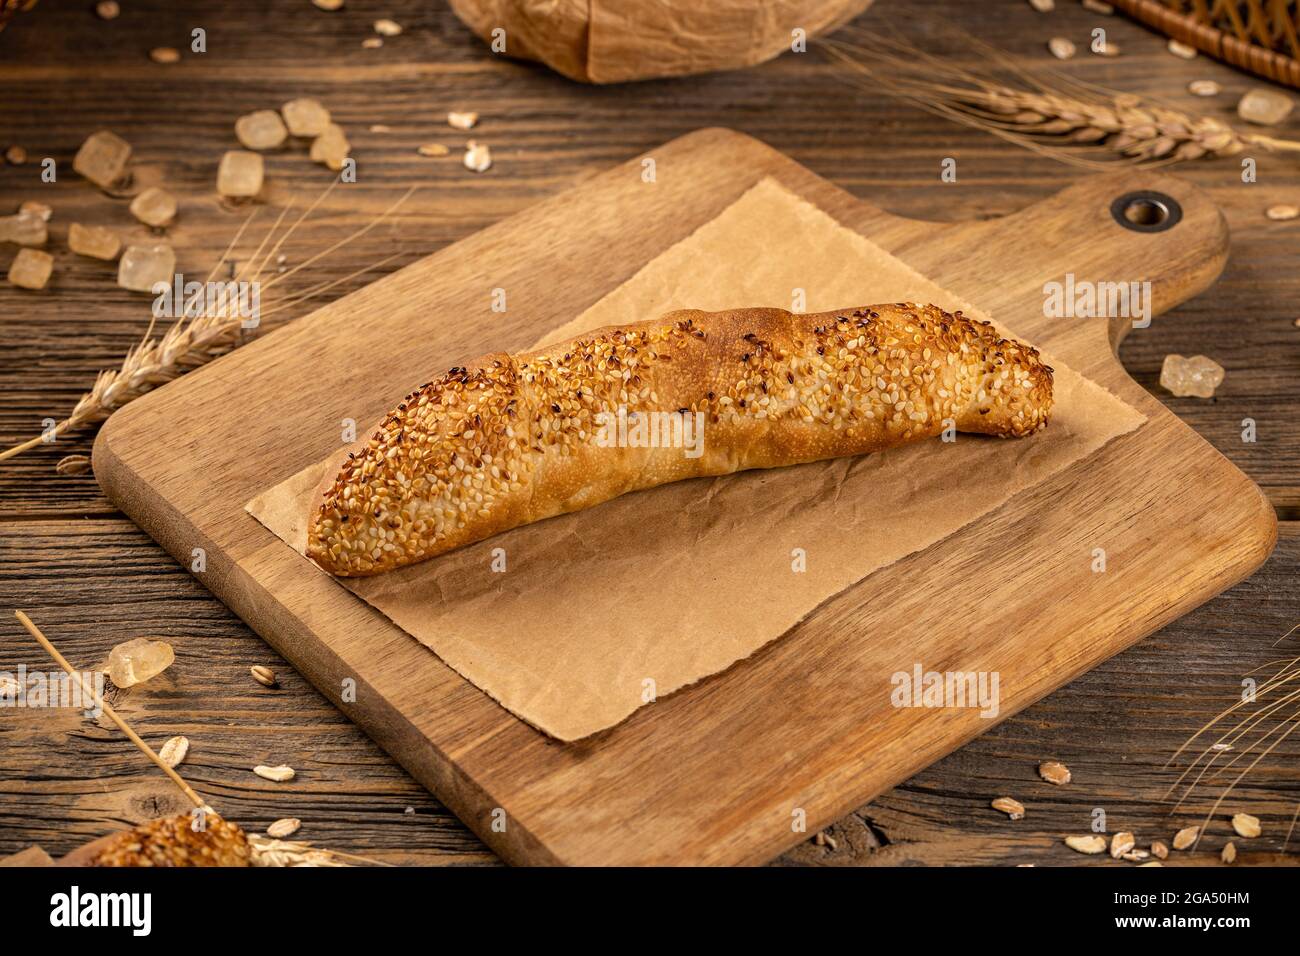 Whole grain hot dog bun ready to eat on wooden background Stock Photo